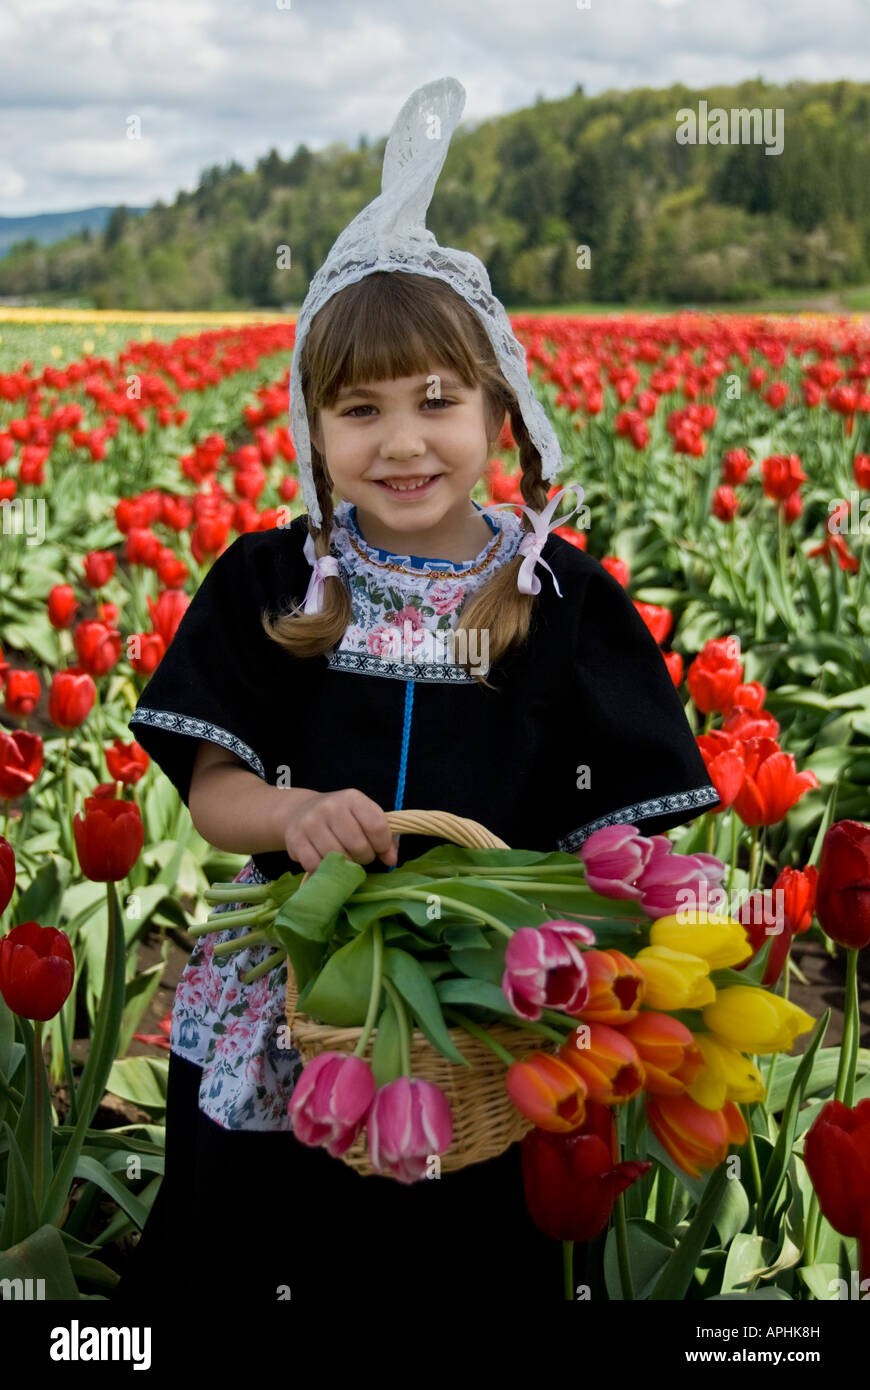 Young smiling Dutch girl with a Basket full of Tulips Stock Photo - Alamy